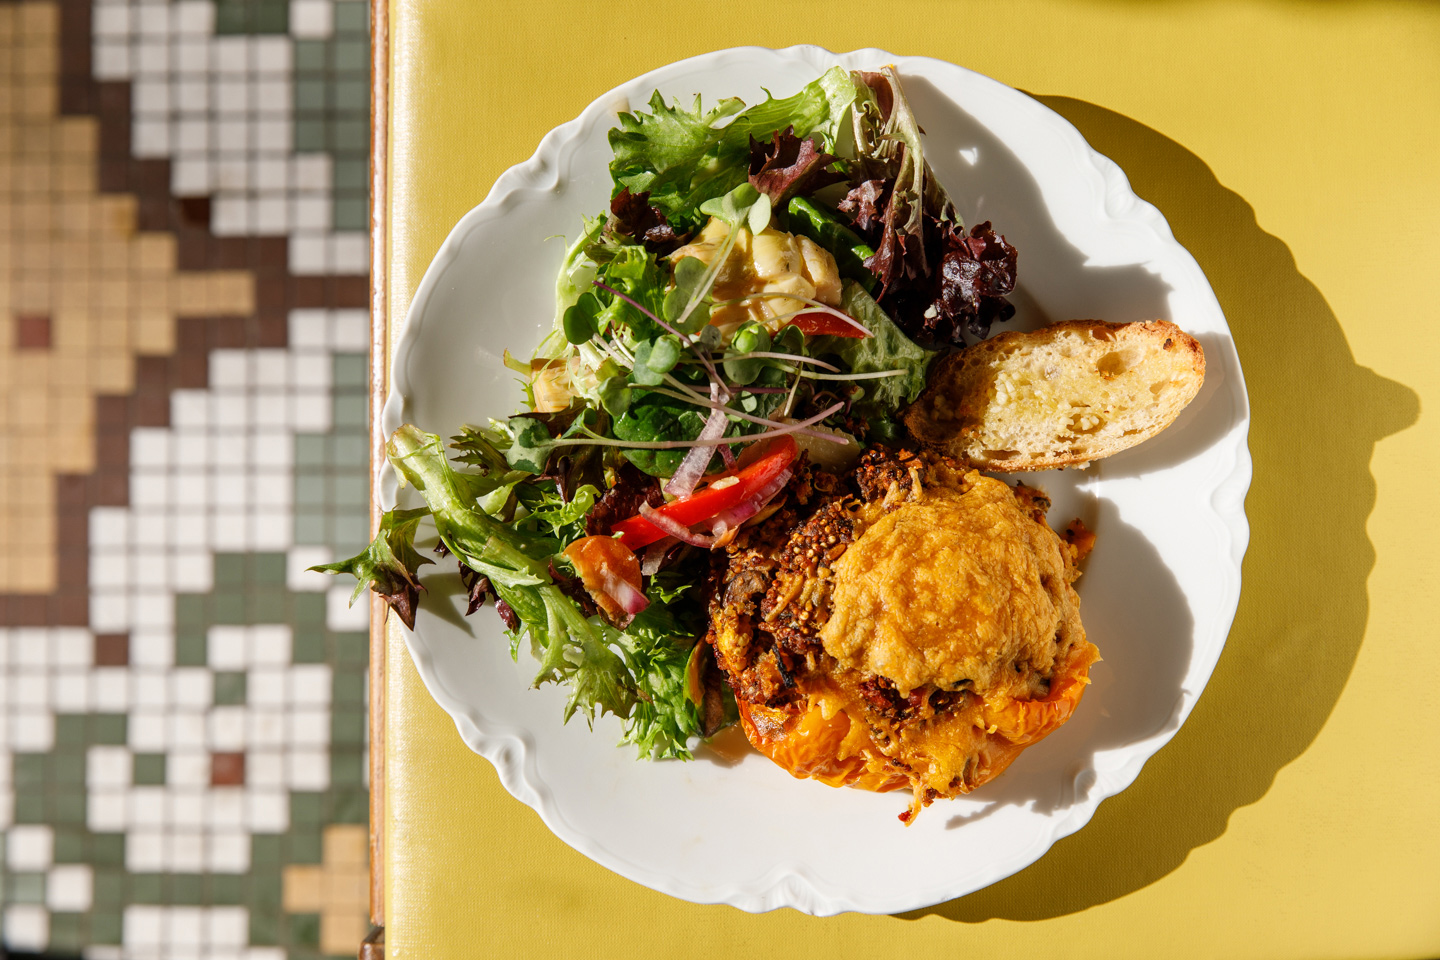 editorial food photographer - a main dish of vegan food at the Tricklebee Cafe